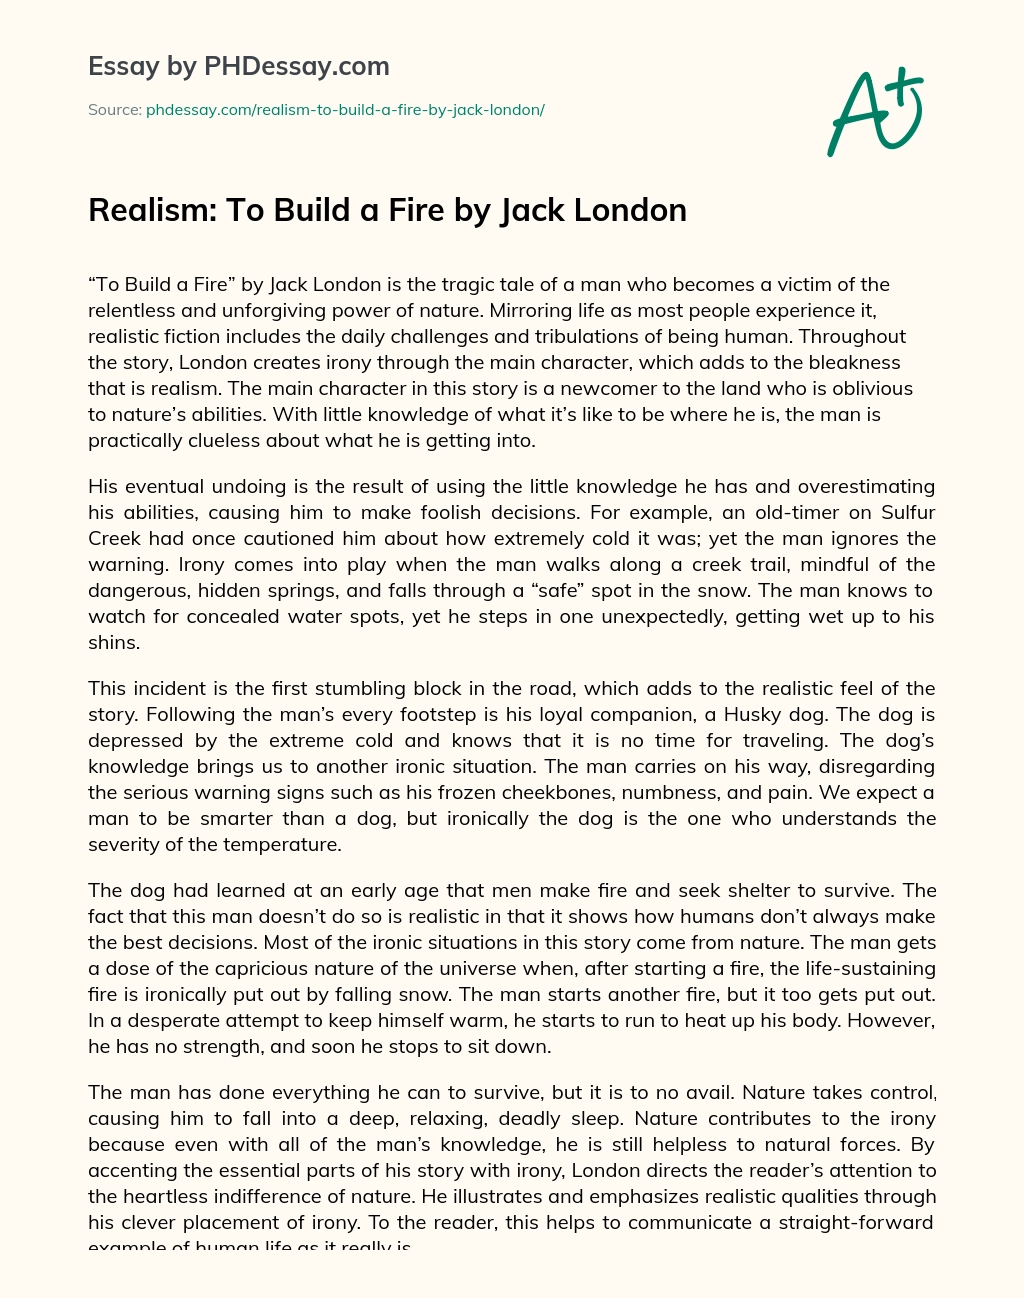 Realism: To Build a Fire by Jack London essay